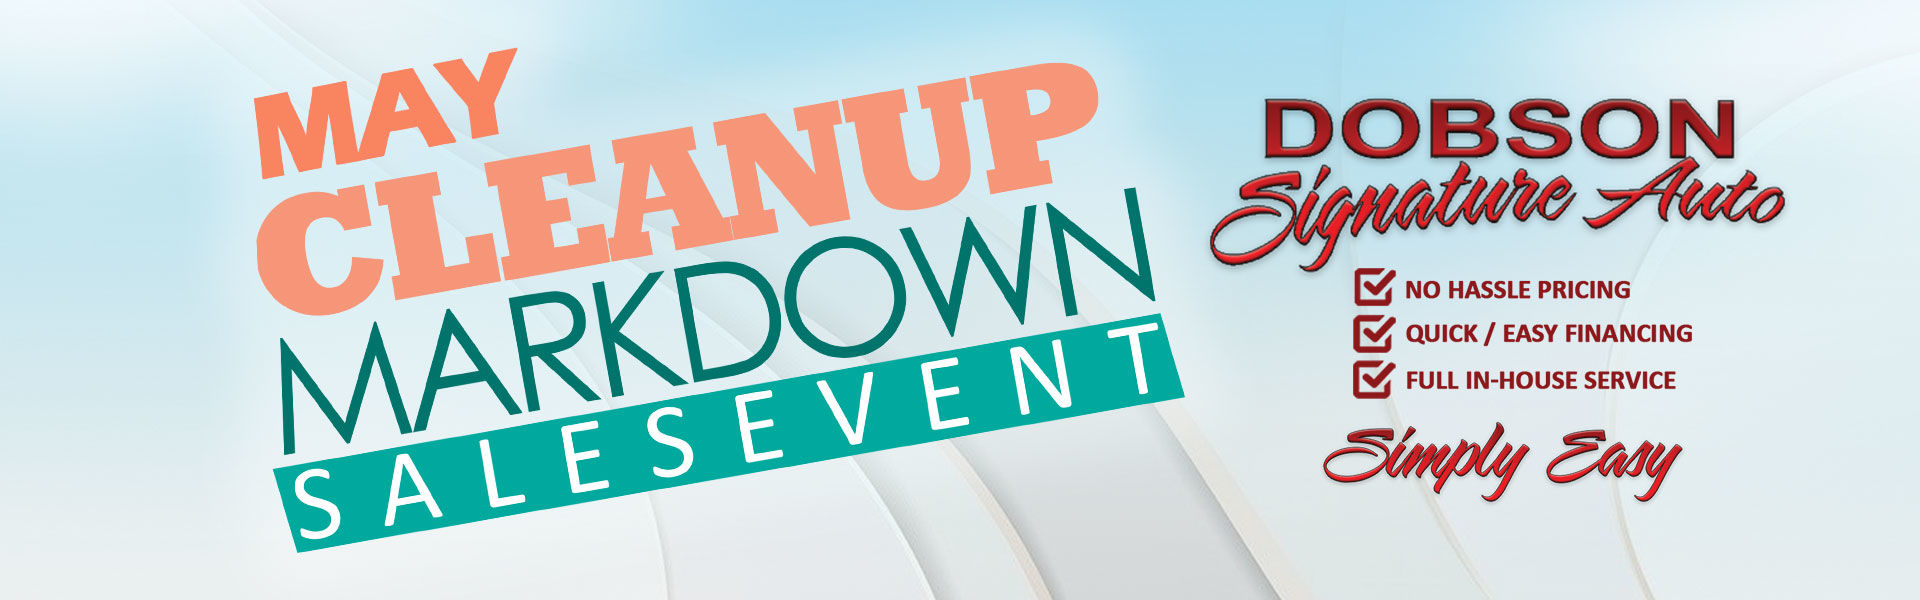 Cleanup Markdown Sales Event